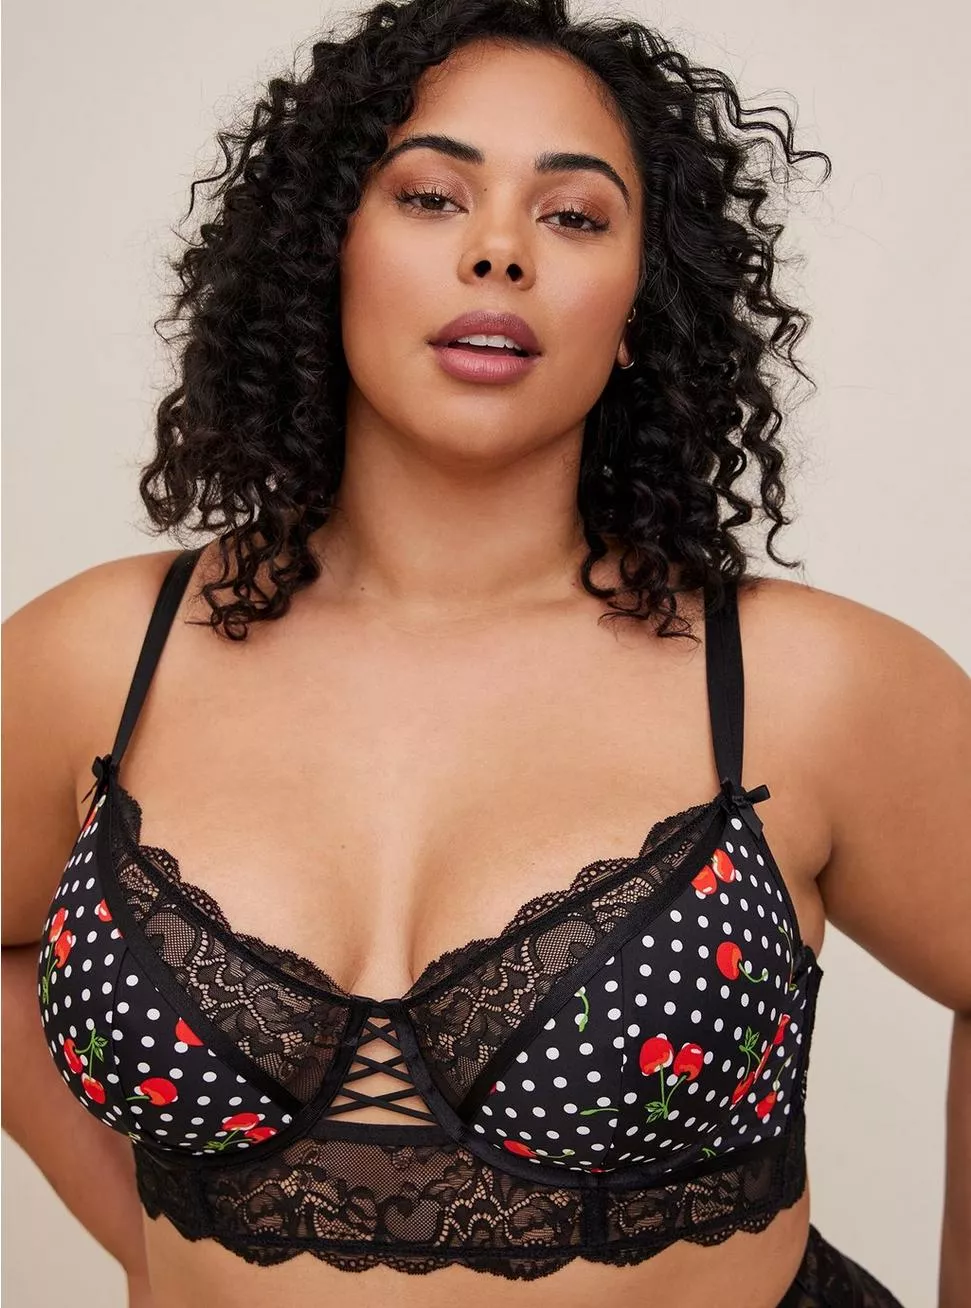 Entice exclusive to George Women's 34E Black & Red Lace Underwire